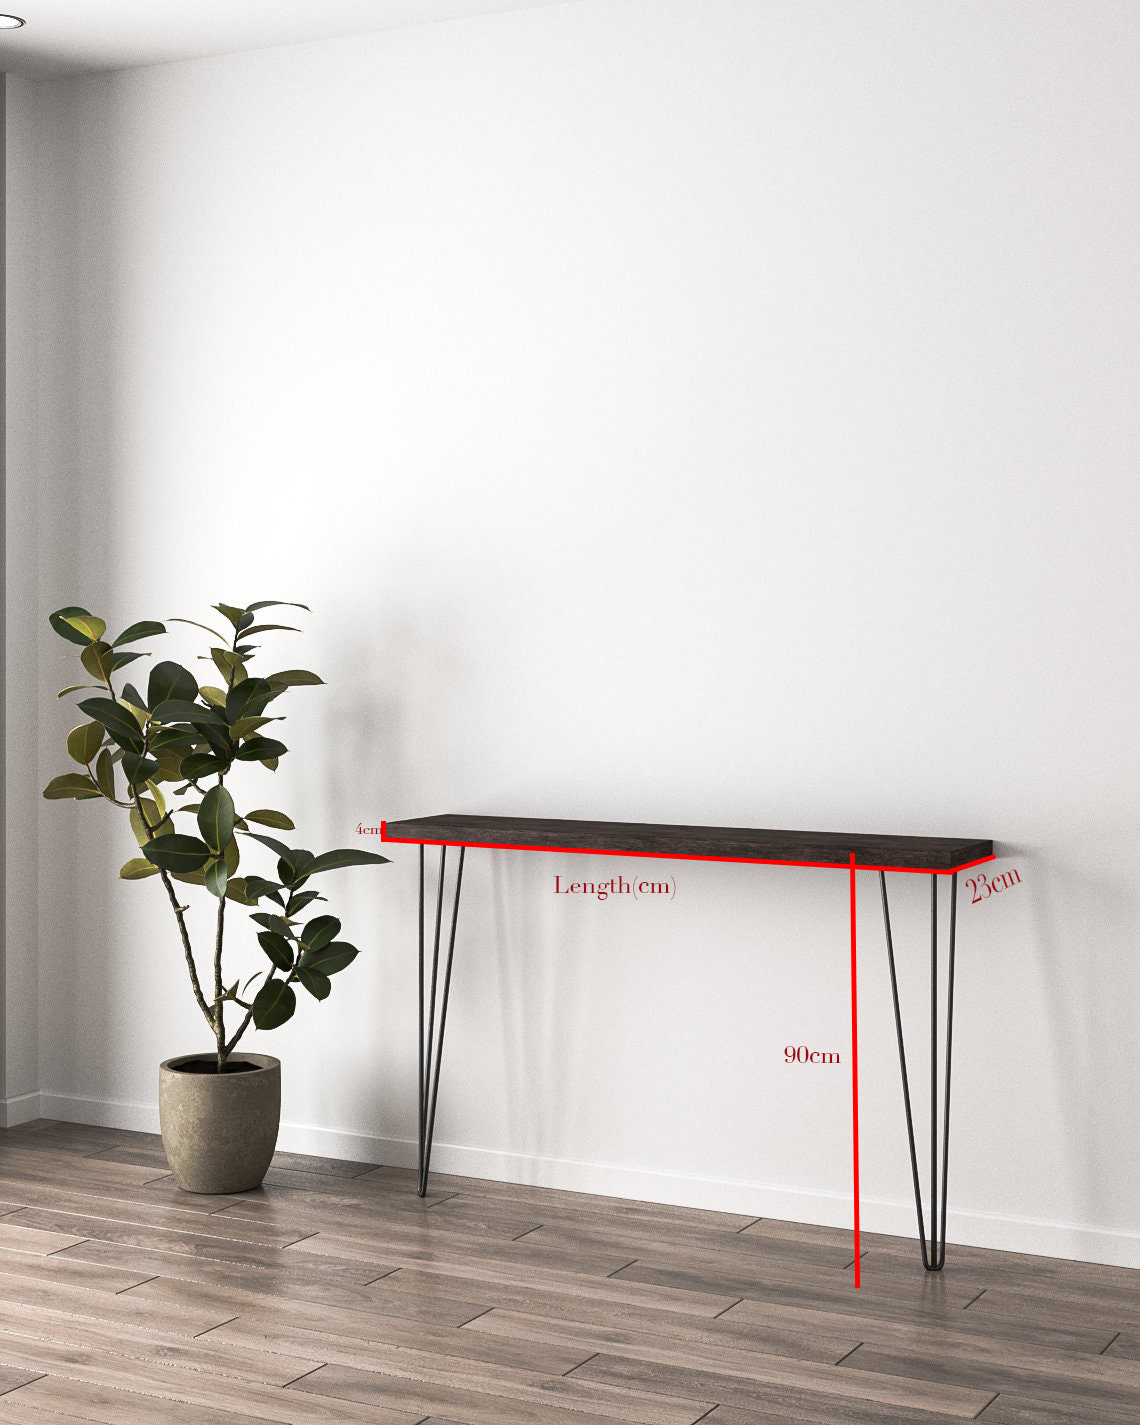 Stylish Console Tables and Hallway Tables with hairpin legs, showcasing black, wood, and storage options.